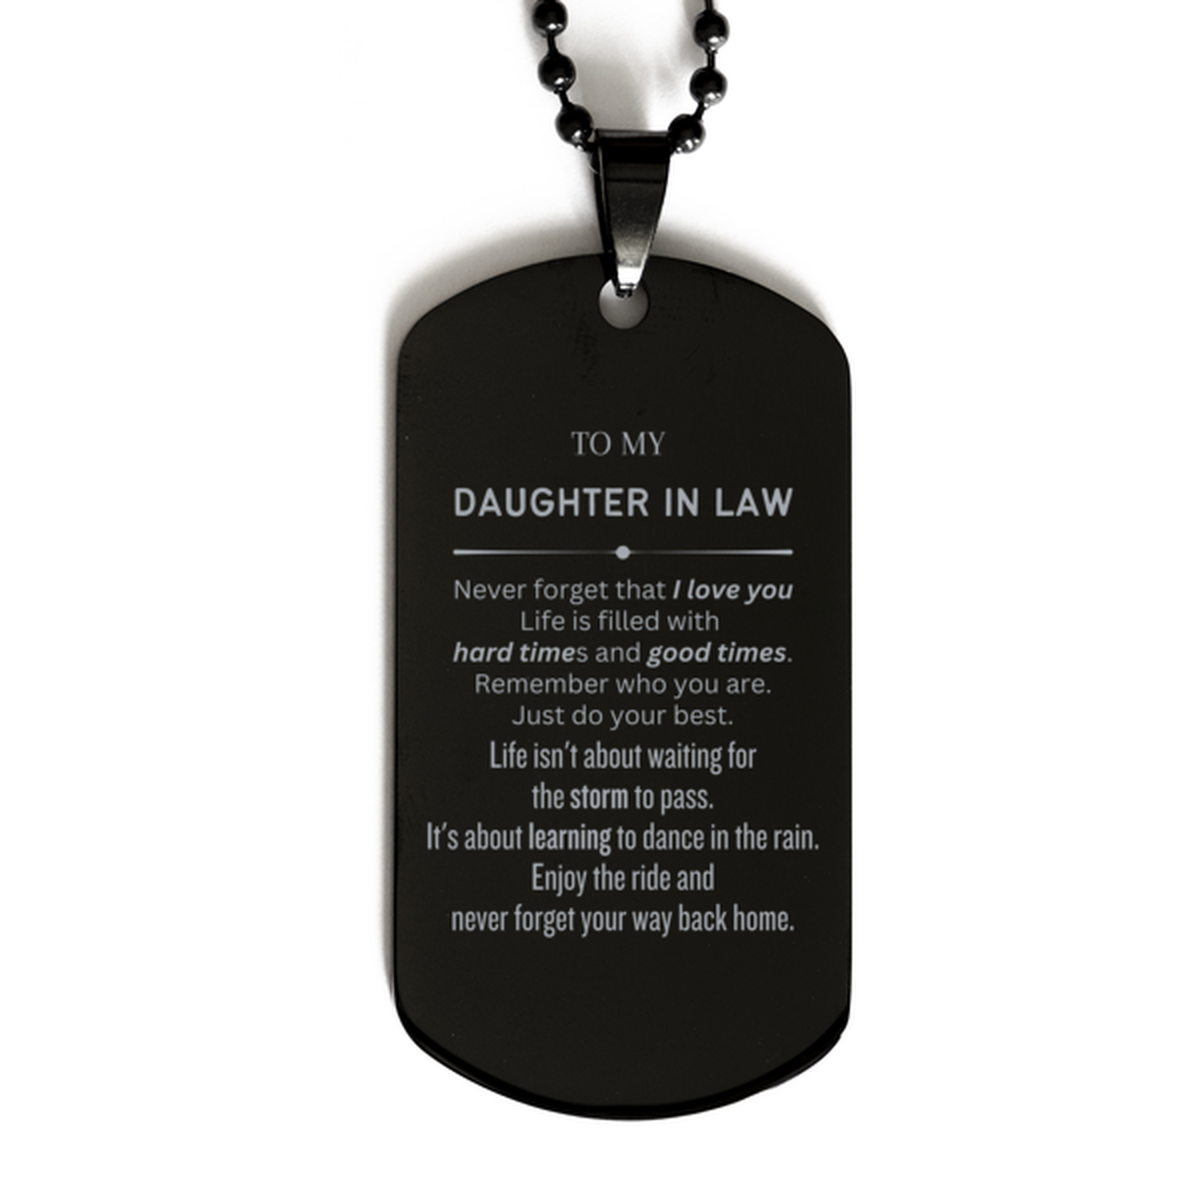 Christmas Daughter In Law Black Dog Tag Gifts, To My Daughter In Law Birthday Thank You Gifts For Daughter In Law, Graduation Unique Gifts For Daughter In Law To My Daughter In Law Never forget that I love you life is filled with hard times and good times